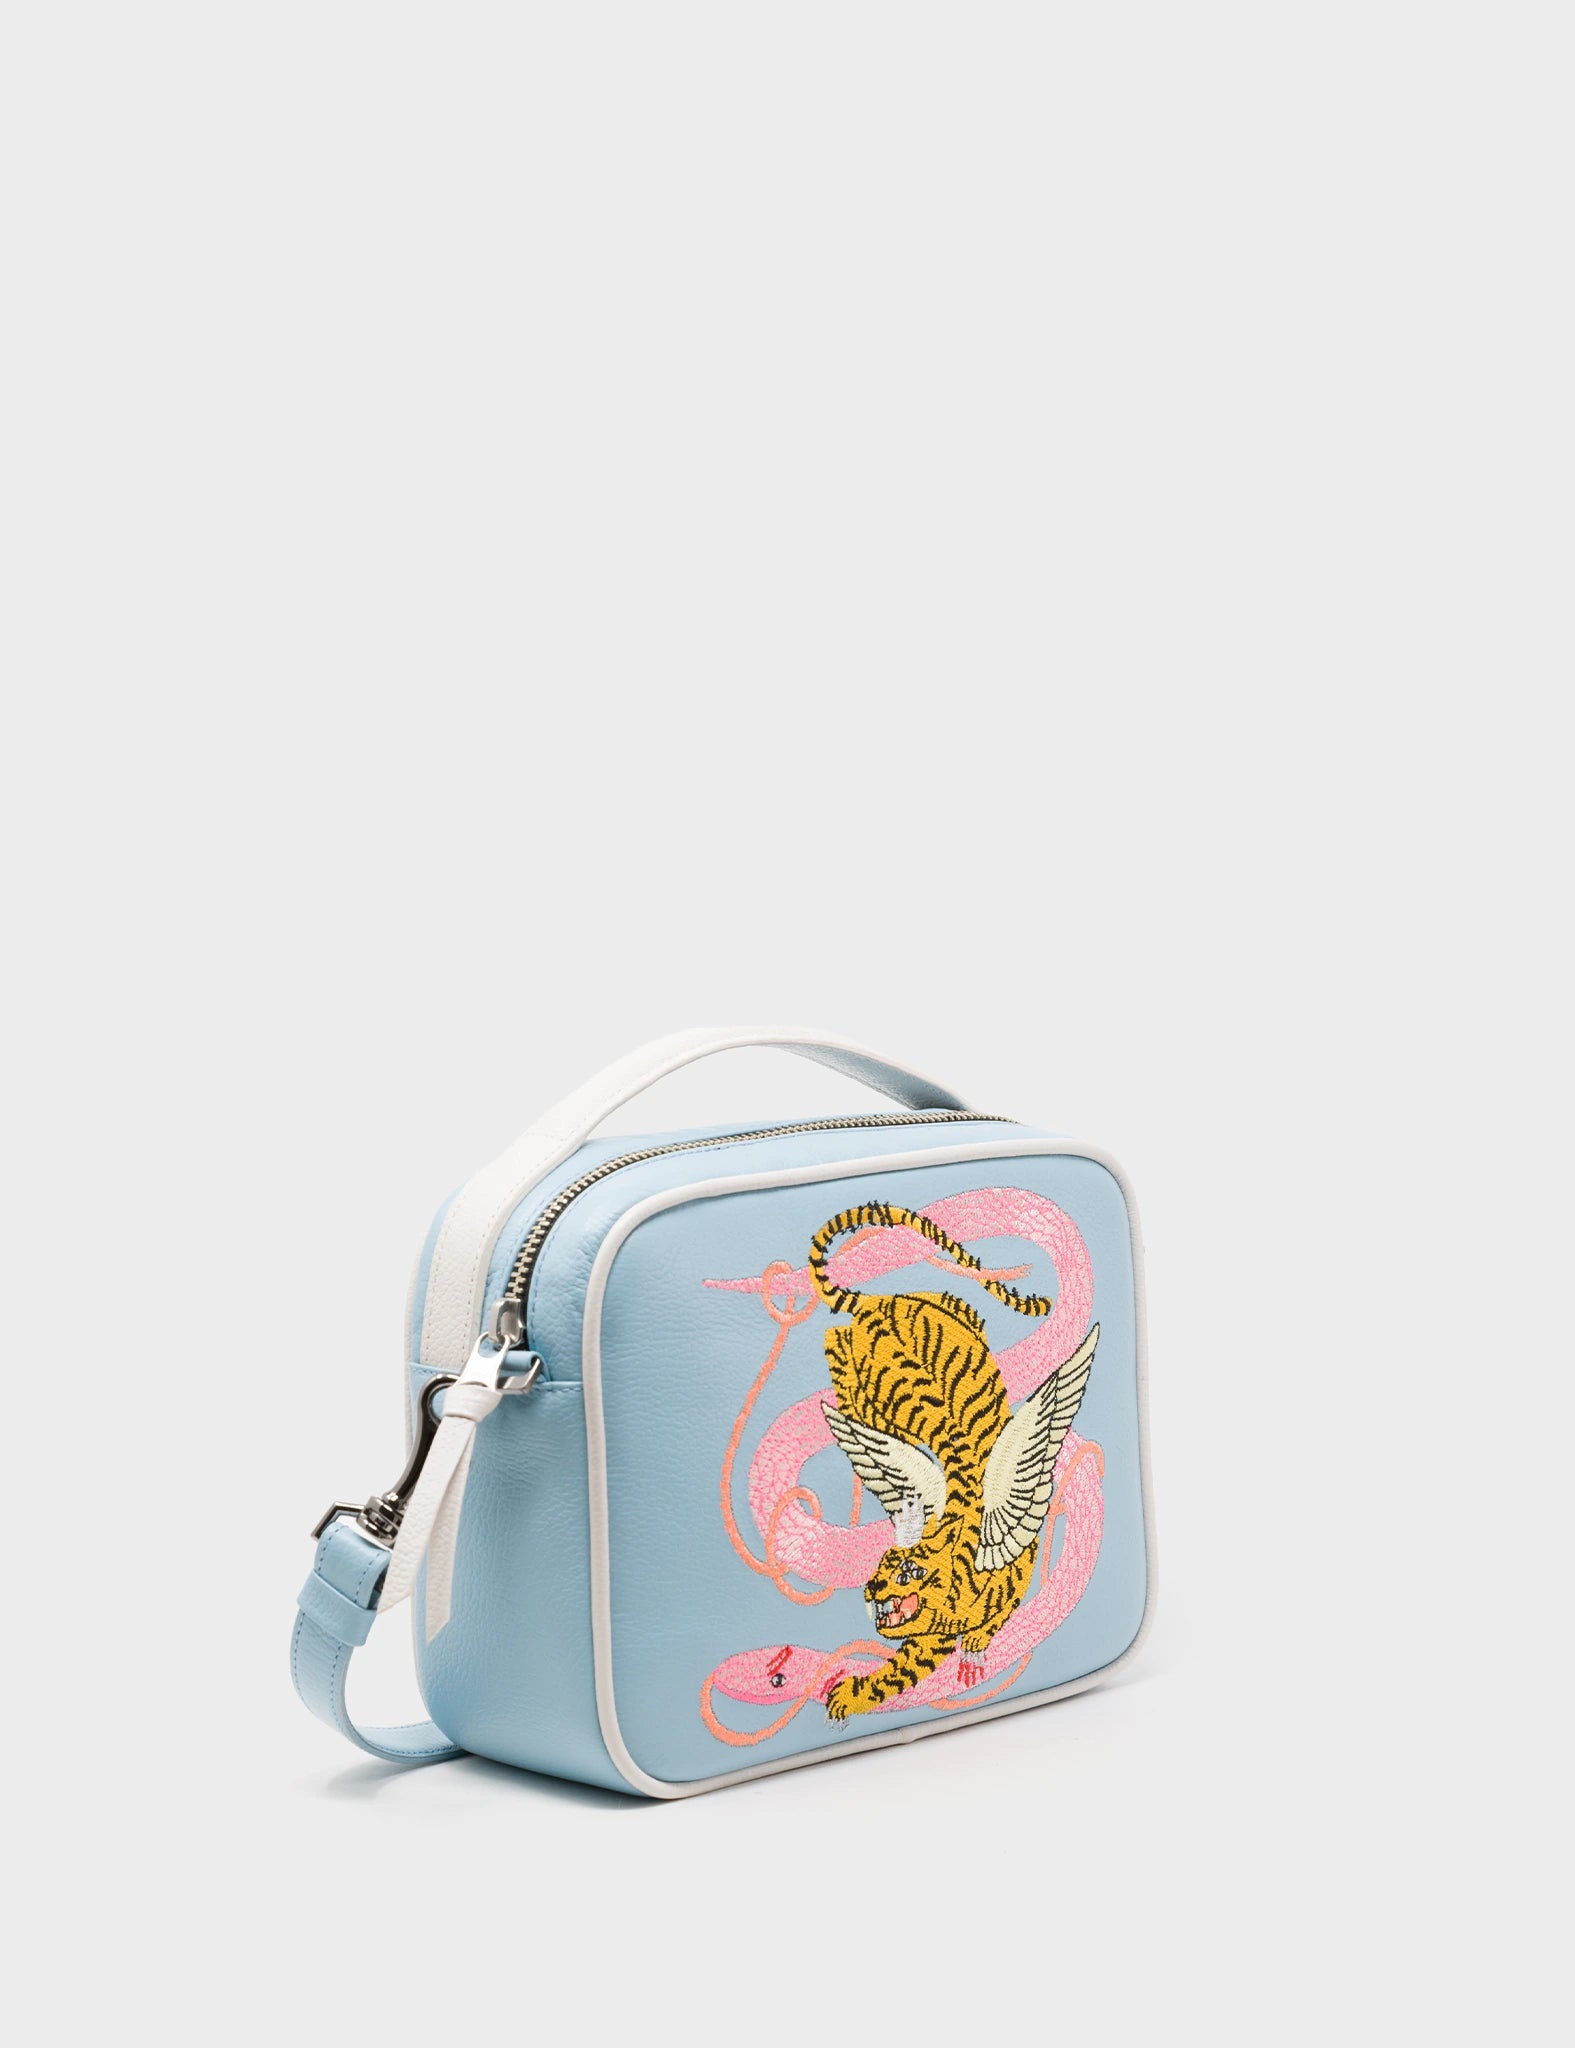 Stratosphere Blue Leather Crossbody Handbag - Tiger and Snake Embroidery